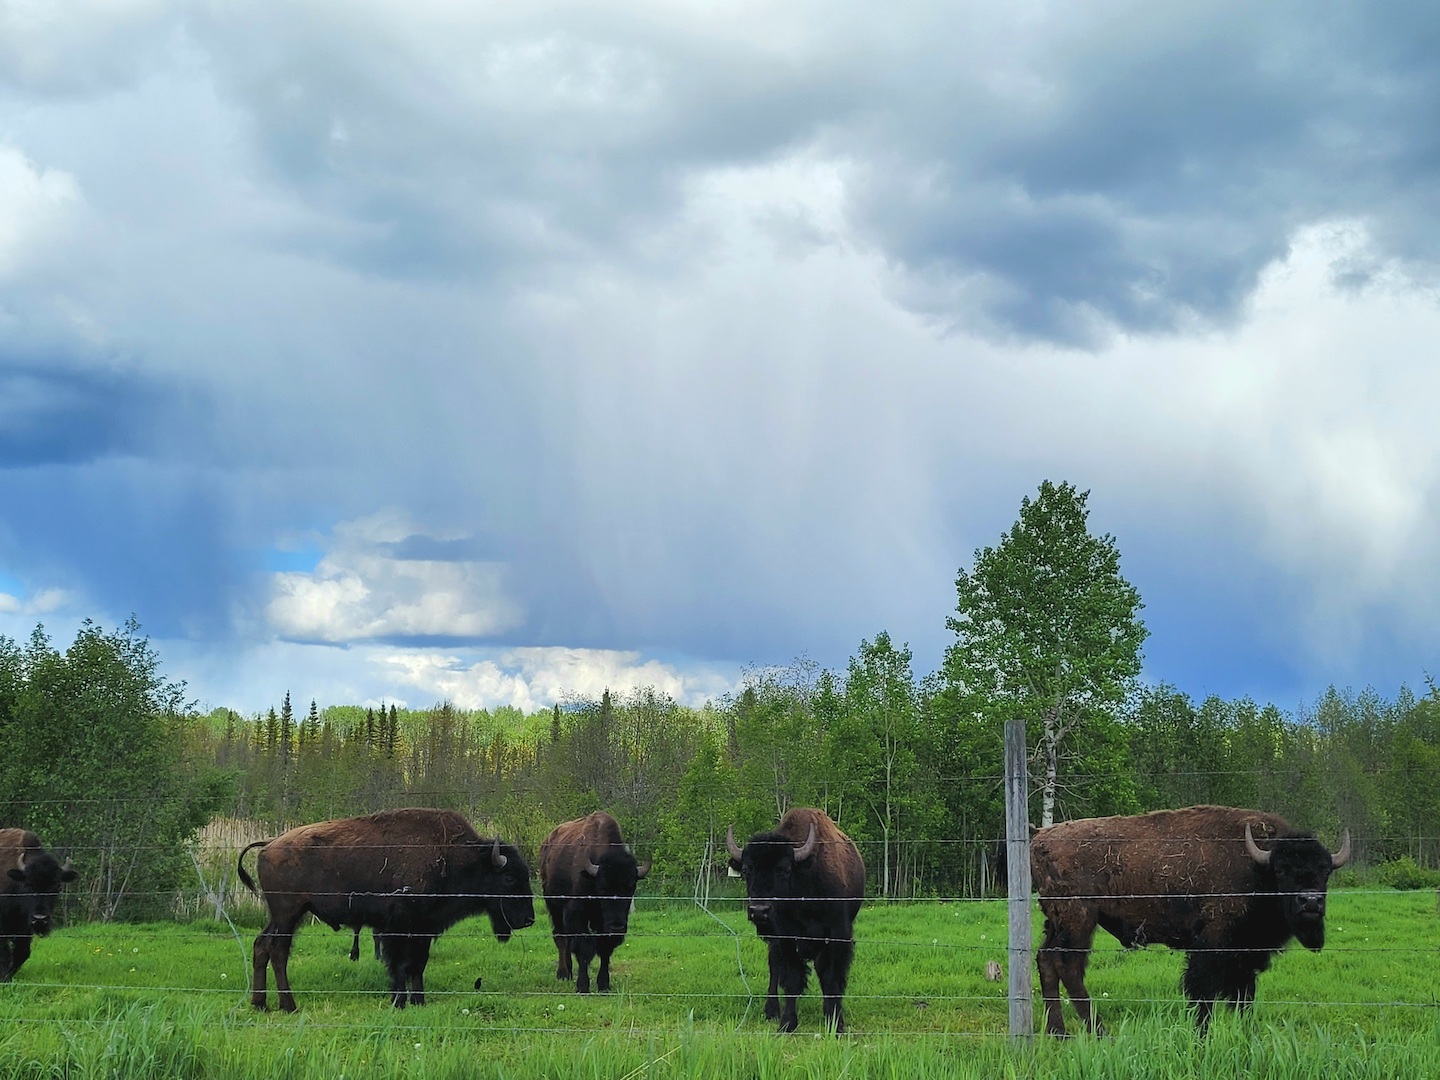 photo of a group of bison in a field under a stormy sky